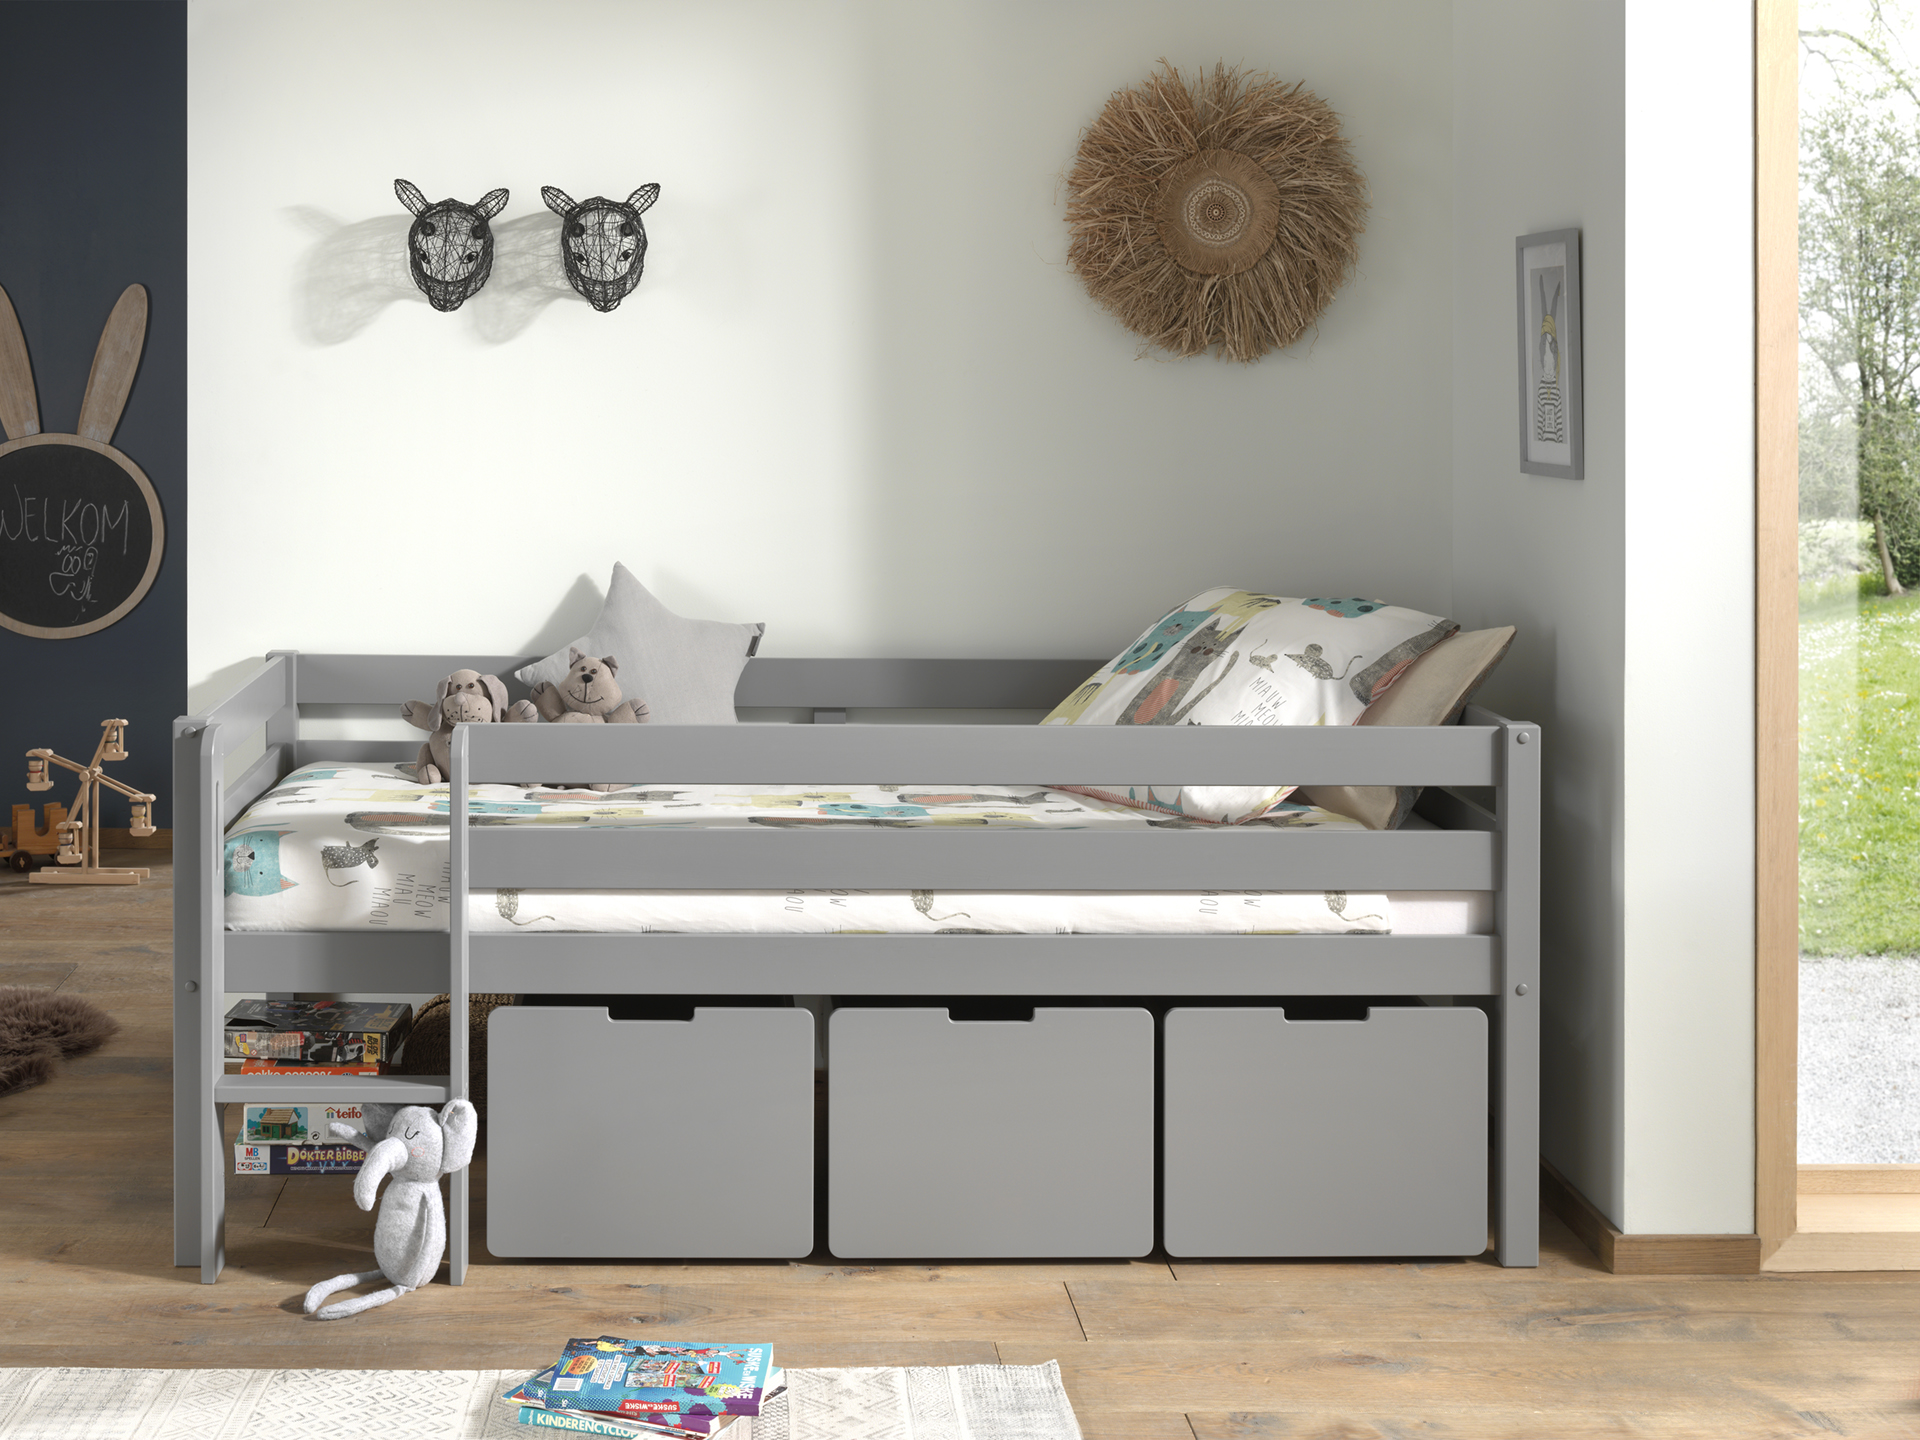 Shiloh Midsleeper Underbed Drawers